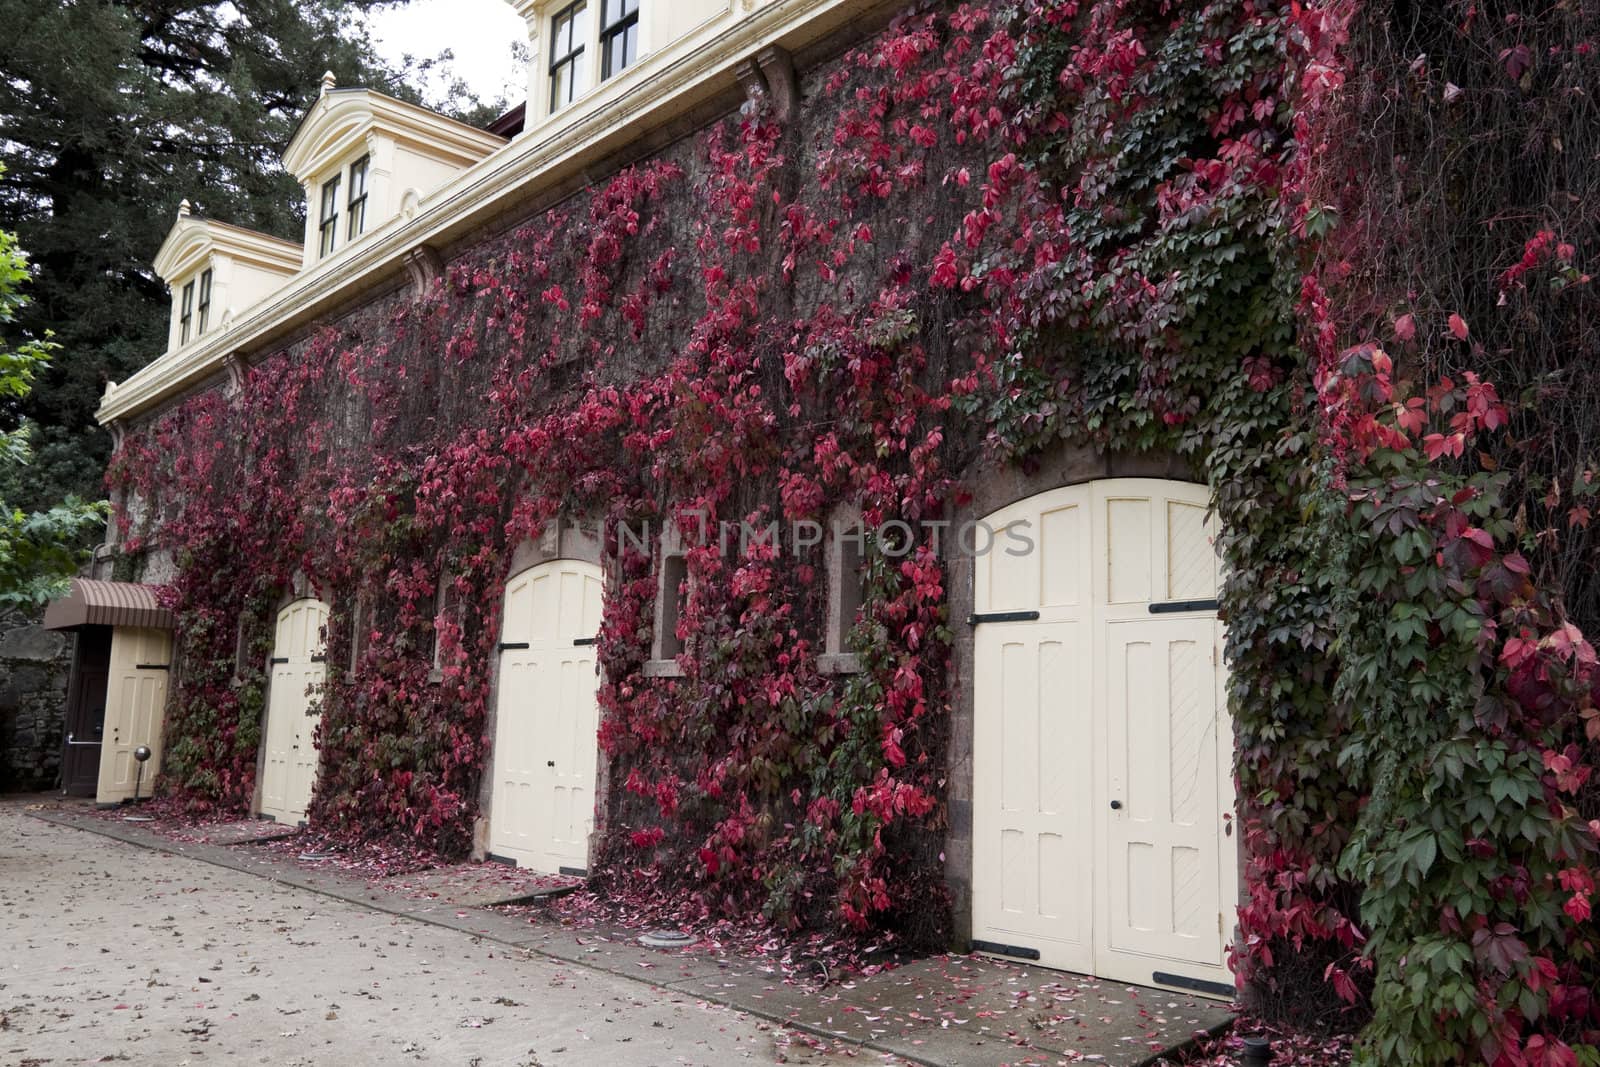 A stable with several wood doors and covered with red ivy